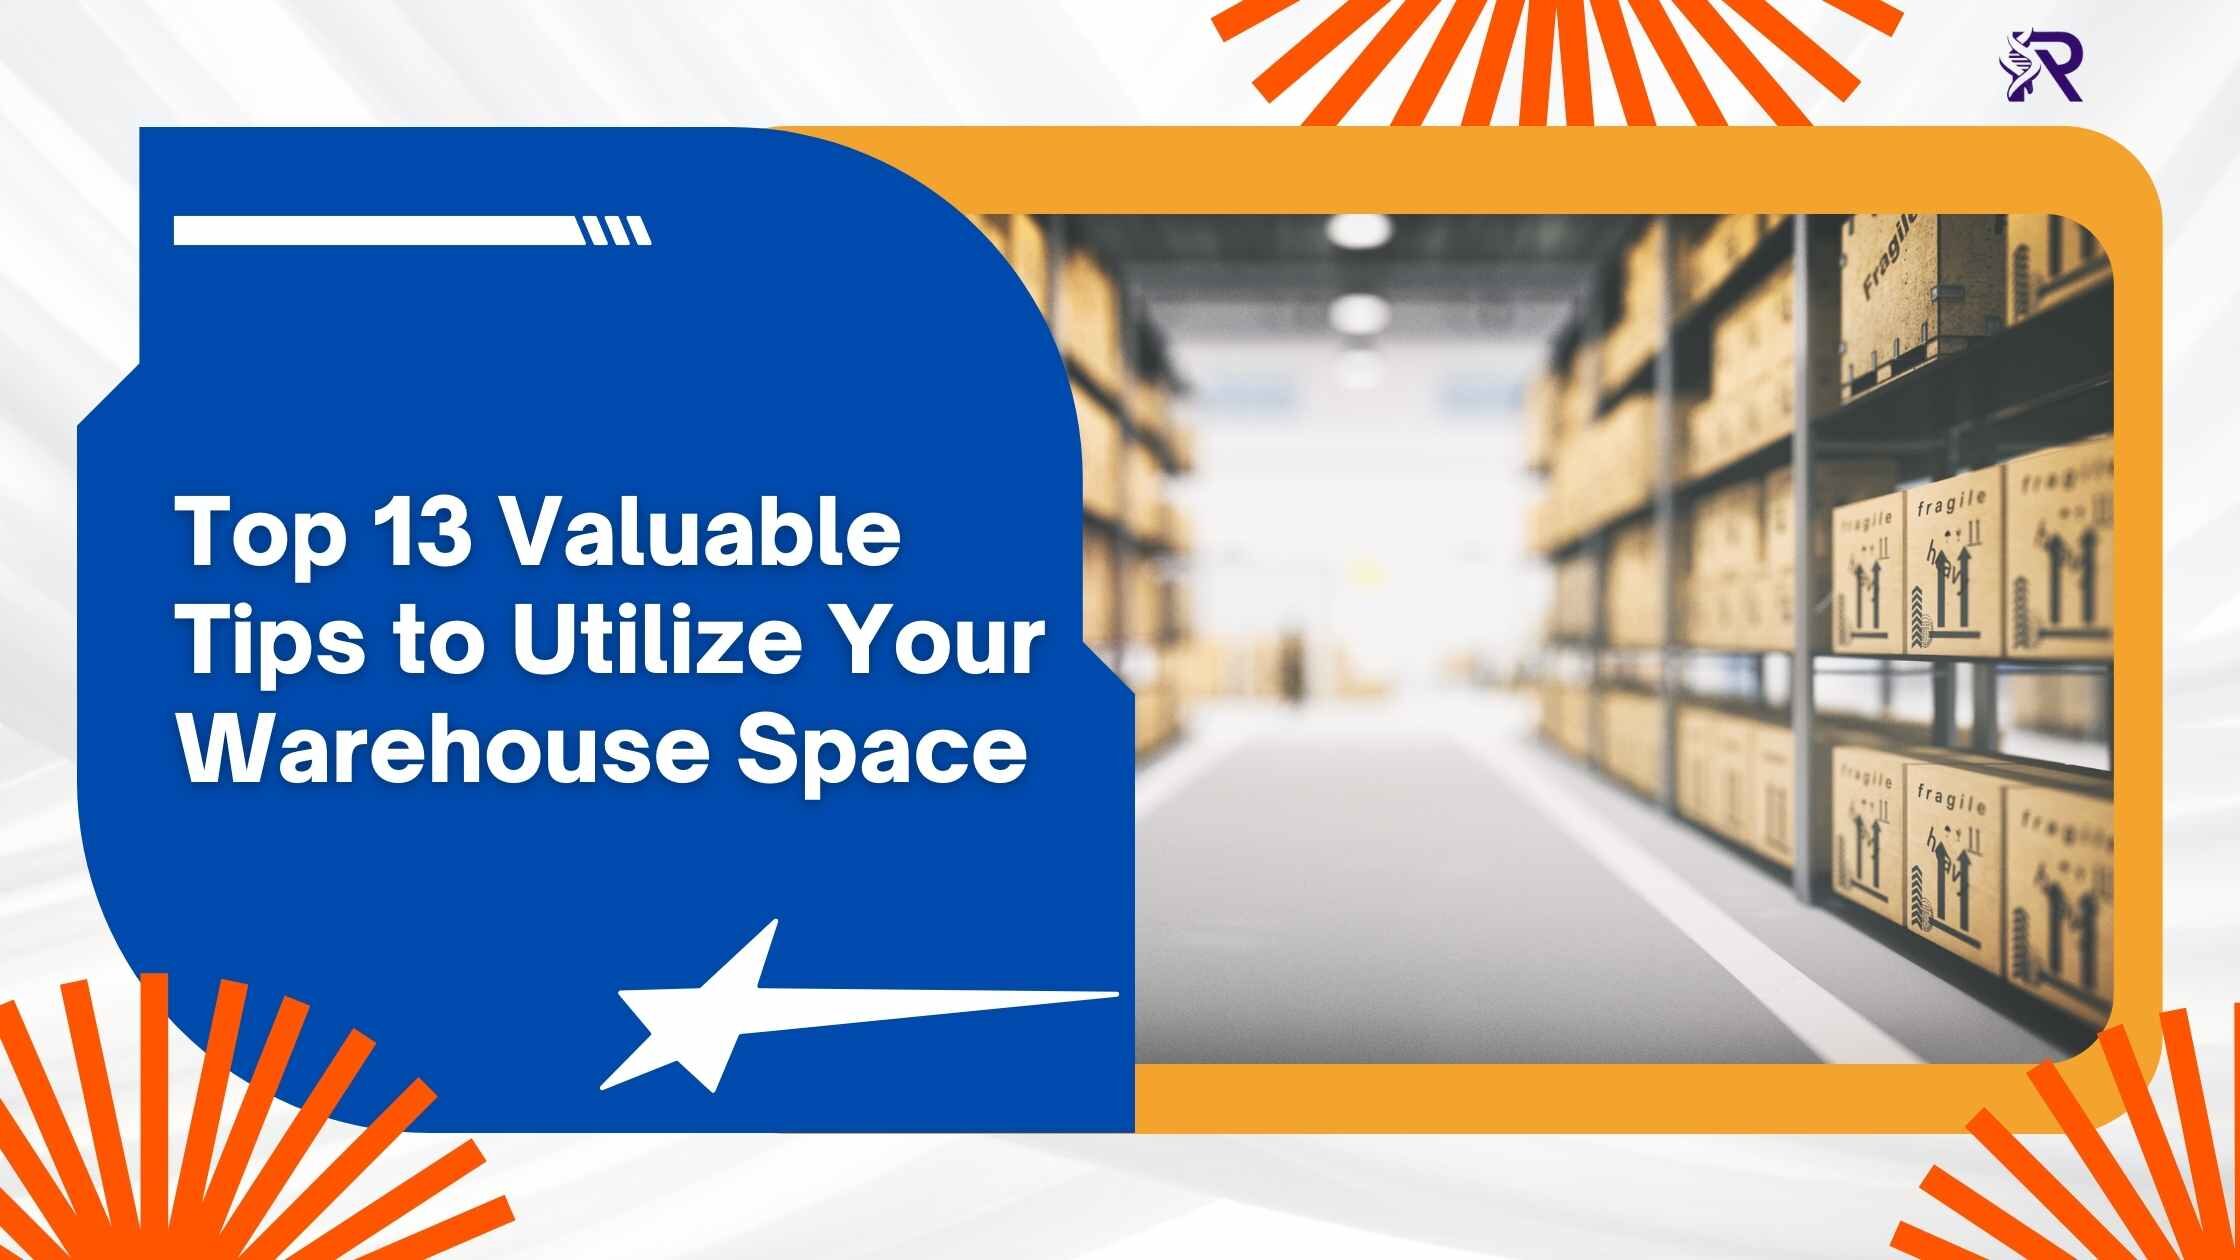 Tips to Utilize Your Warehouse Space